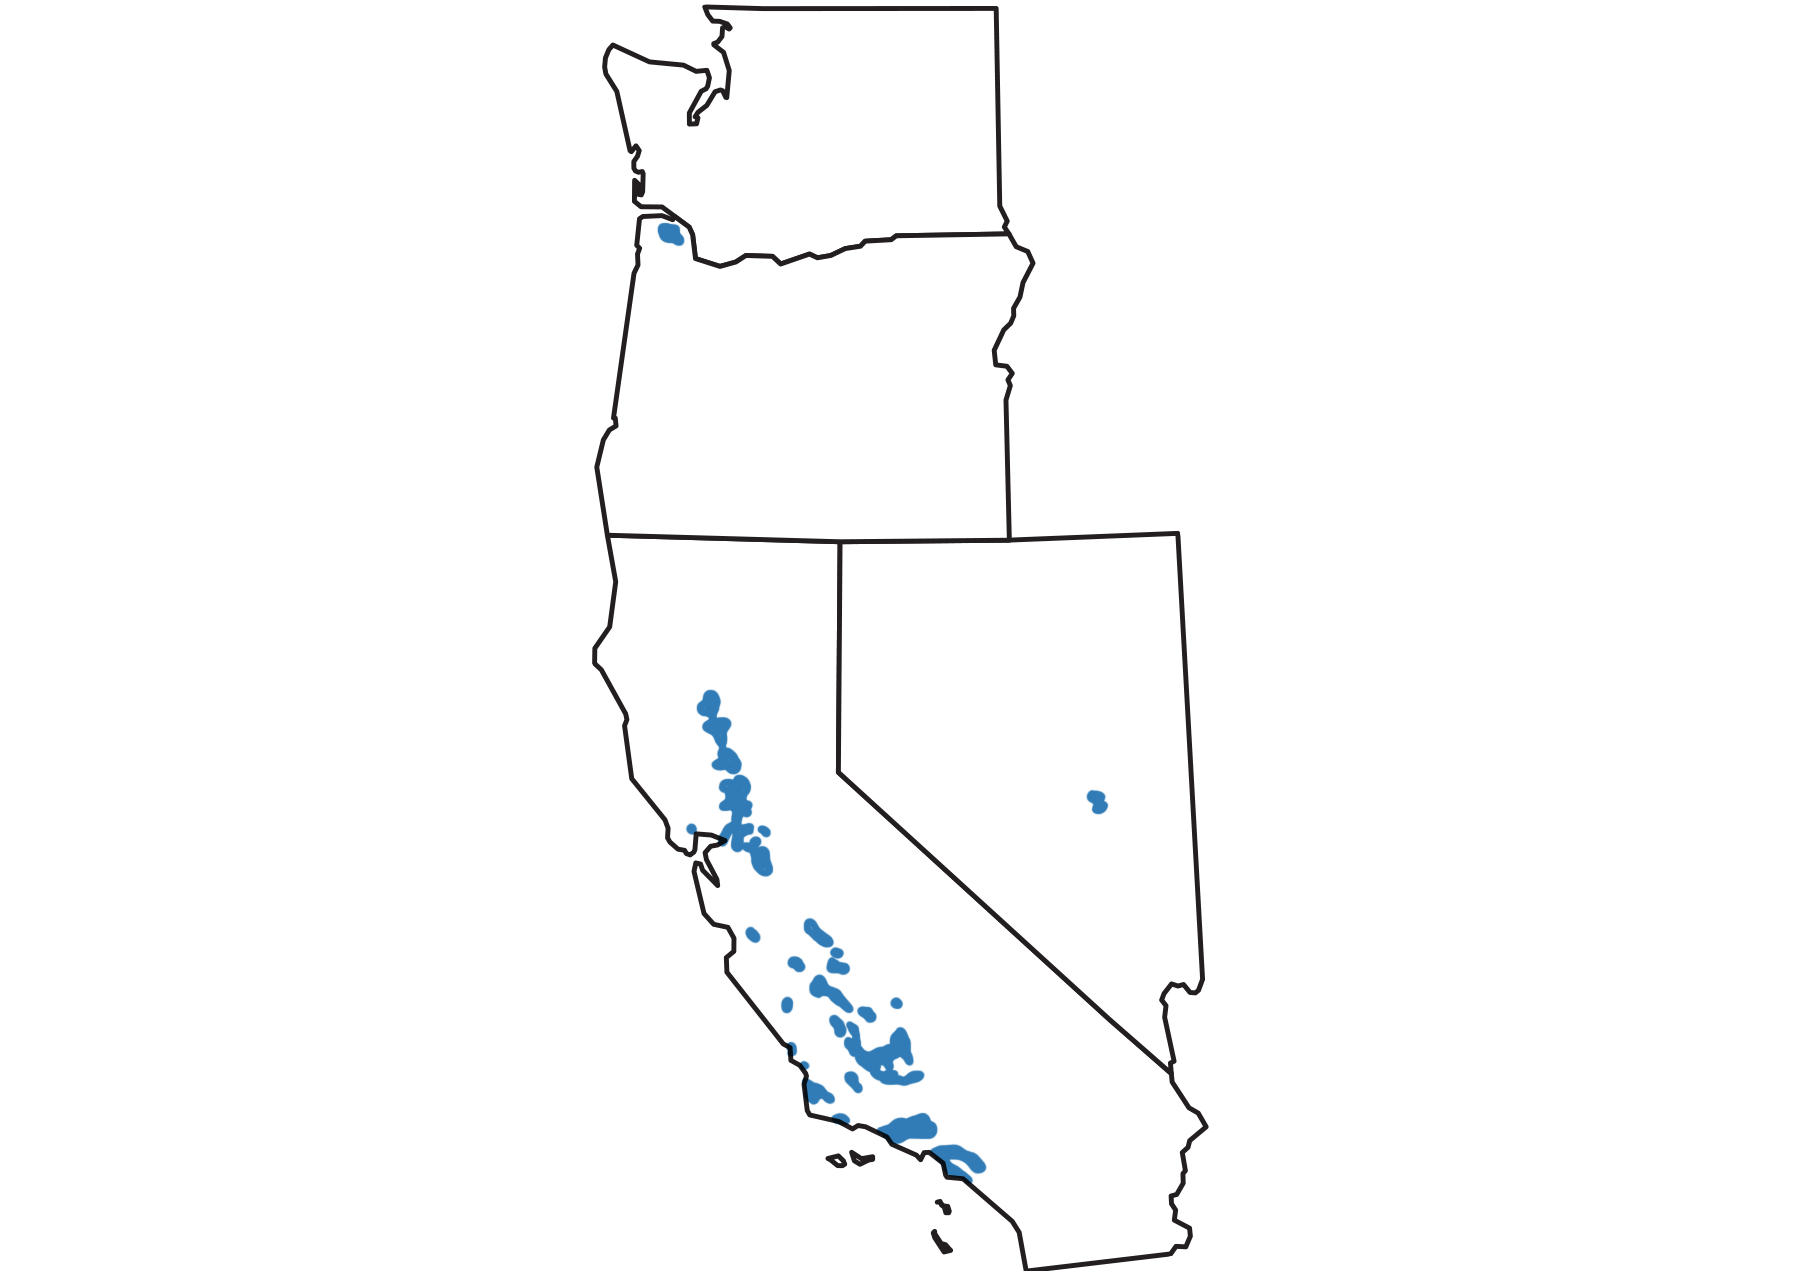 Map shouwing the outlines of Nevada, California, Washington, and Oregon with areas of petroleum extraction shaded blue. Blue shading is in the western part of California, with one dot in east-central Nevada.